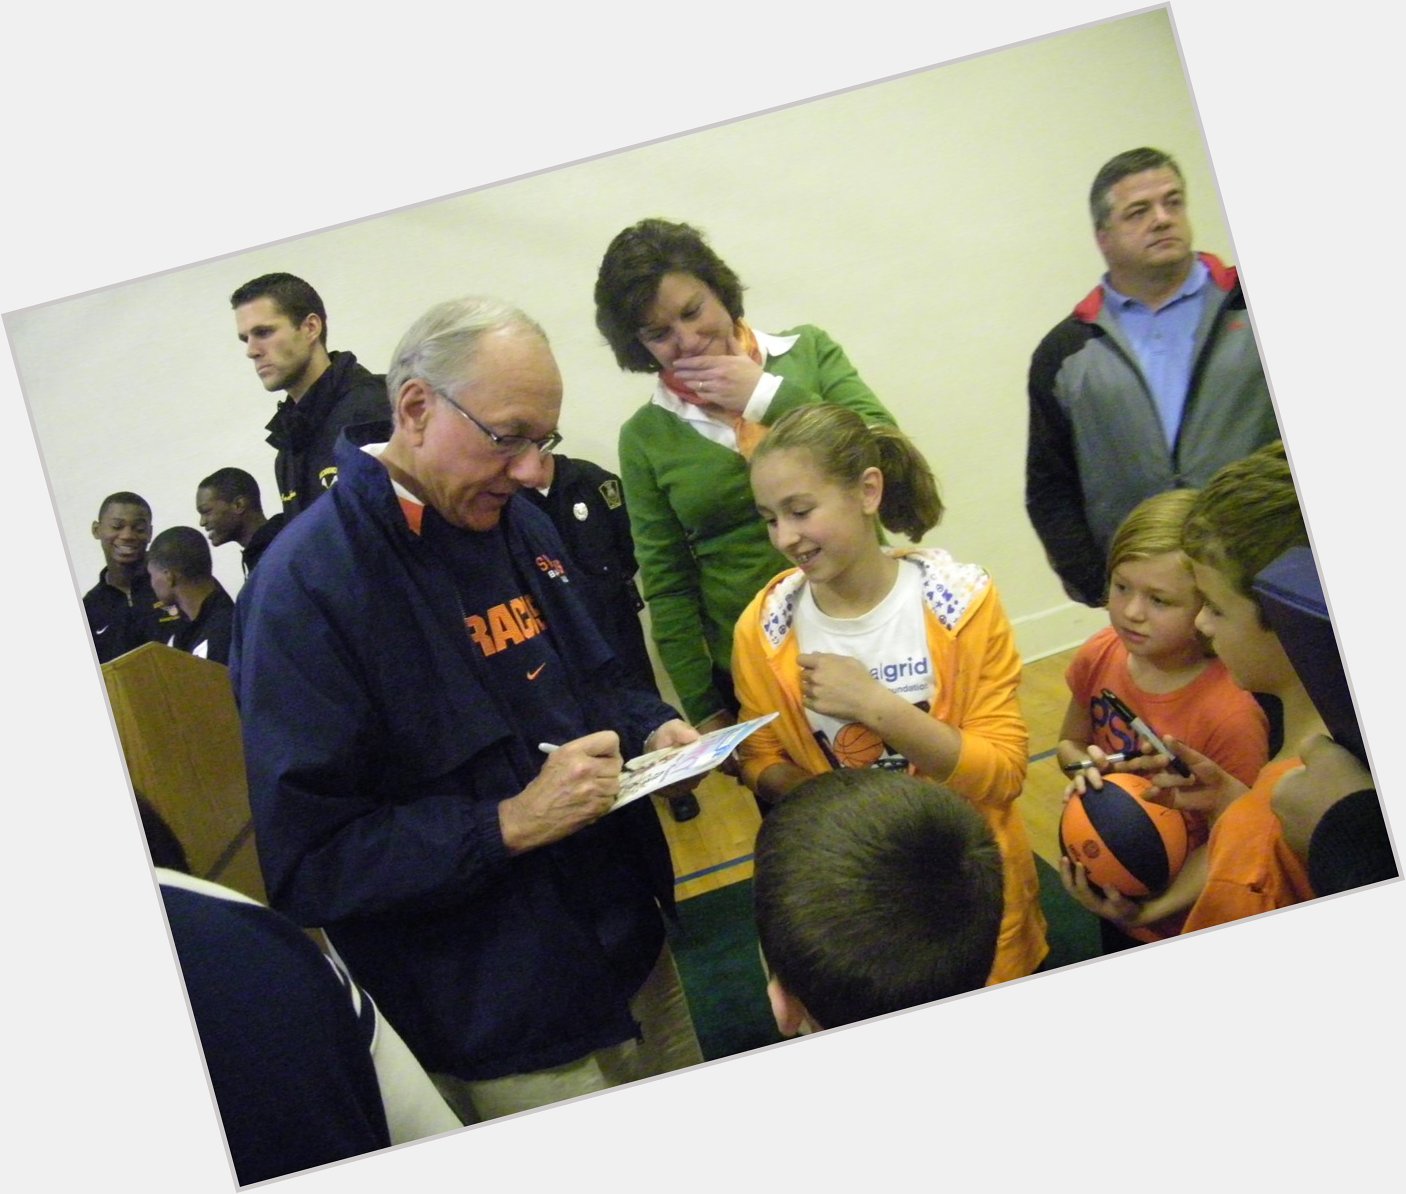 Happy Birthday to Coach Jim Boeheim! His program has helped kids be active throughout the City! 